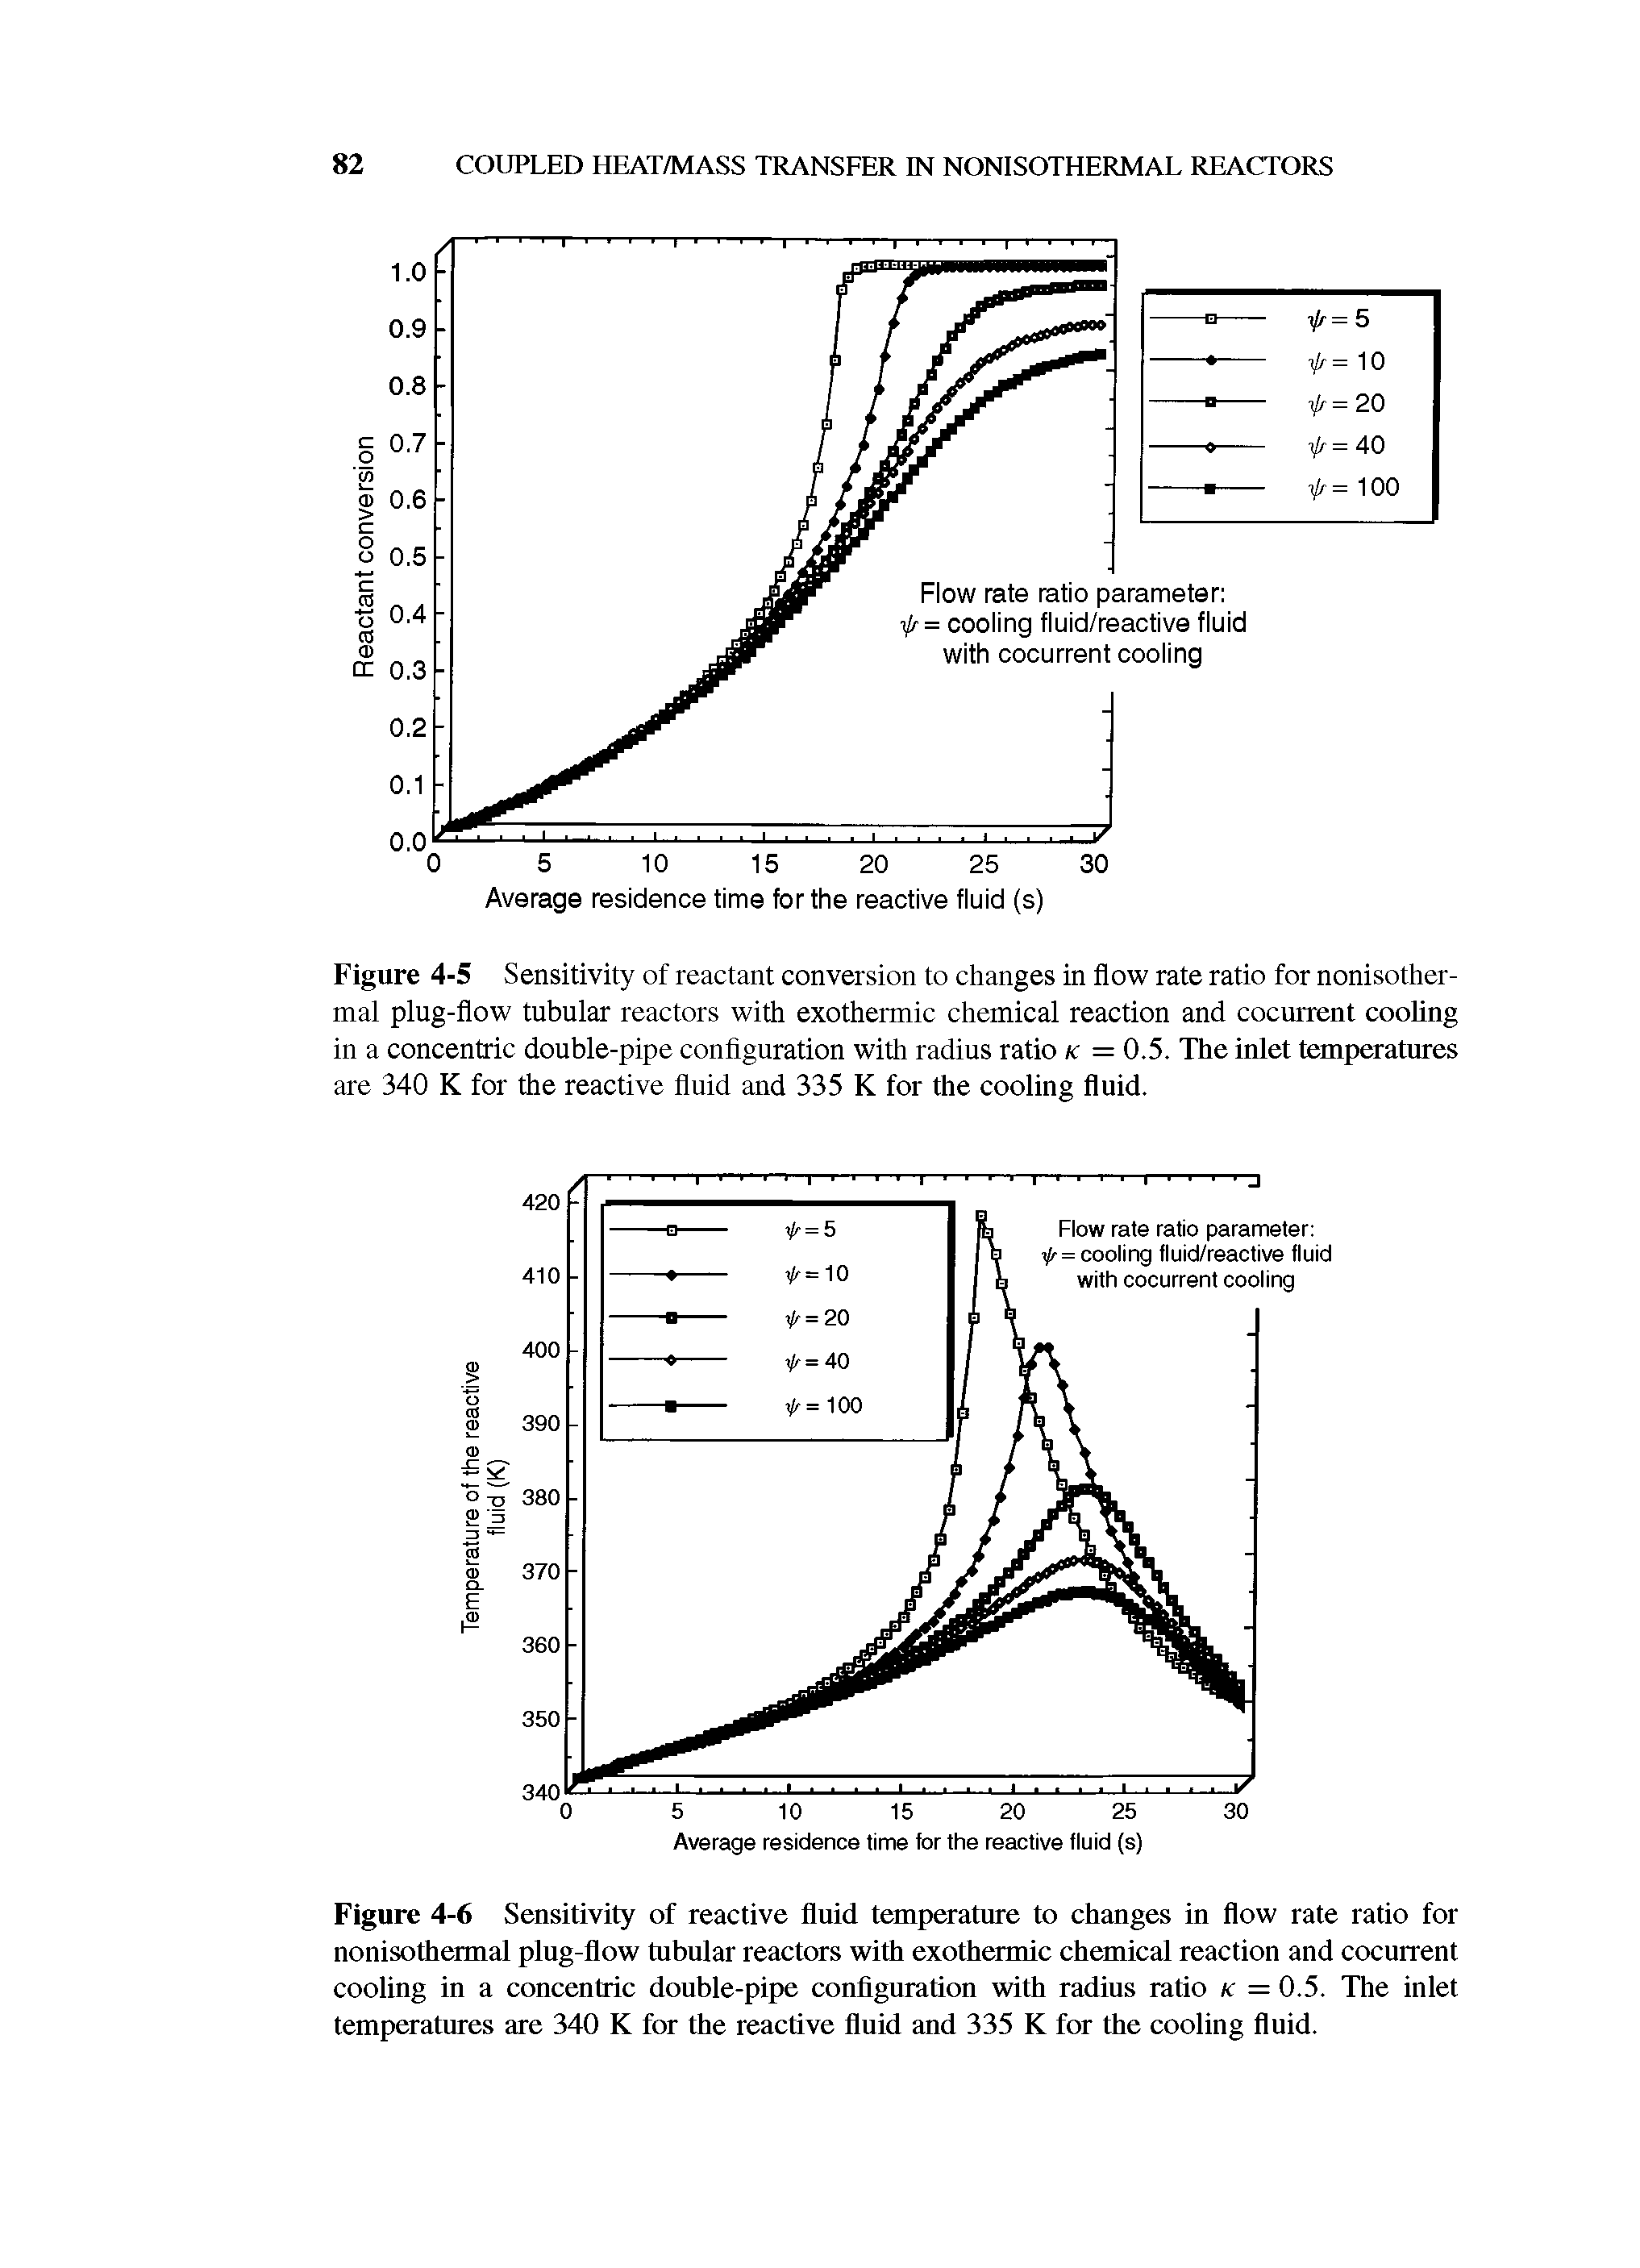 Figure 4-5 Sensitivity of reactant conversion to changes in flow rate ratio for nonisother-mal plug-flow tubular reactors with exothermic chemical reaction and cocurrent cooling in a concentric double-pipe configuration with radius ratio k = 0.5. The inlet tempoatures are 340 K for the reactive fluid and 335 K for the cooling fluid.